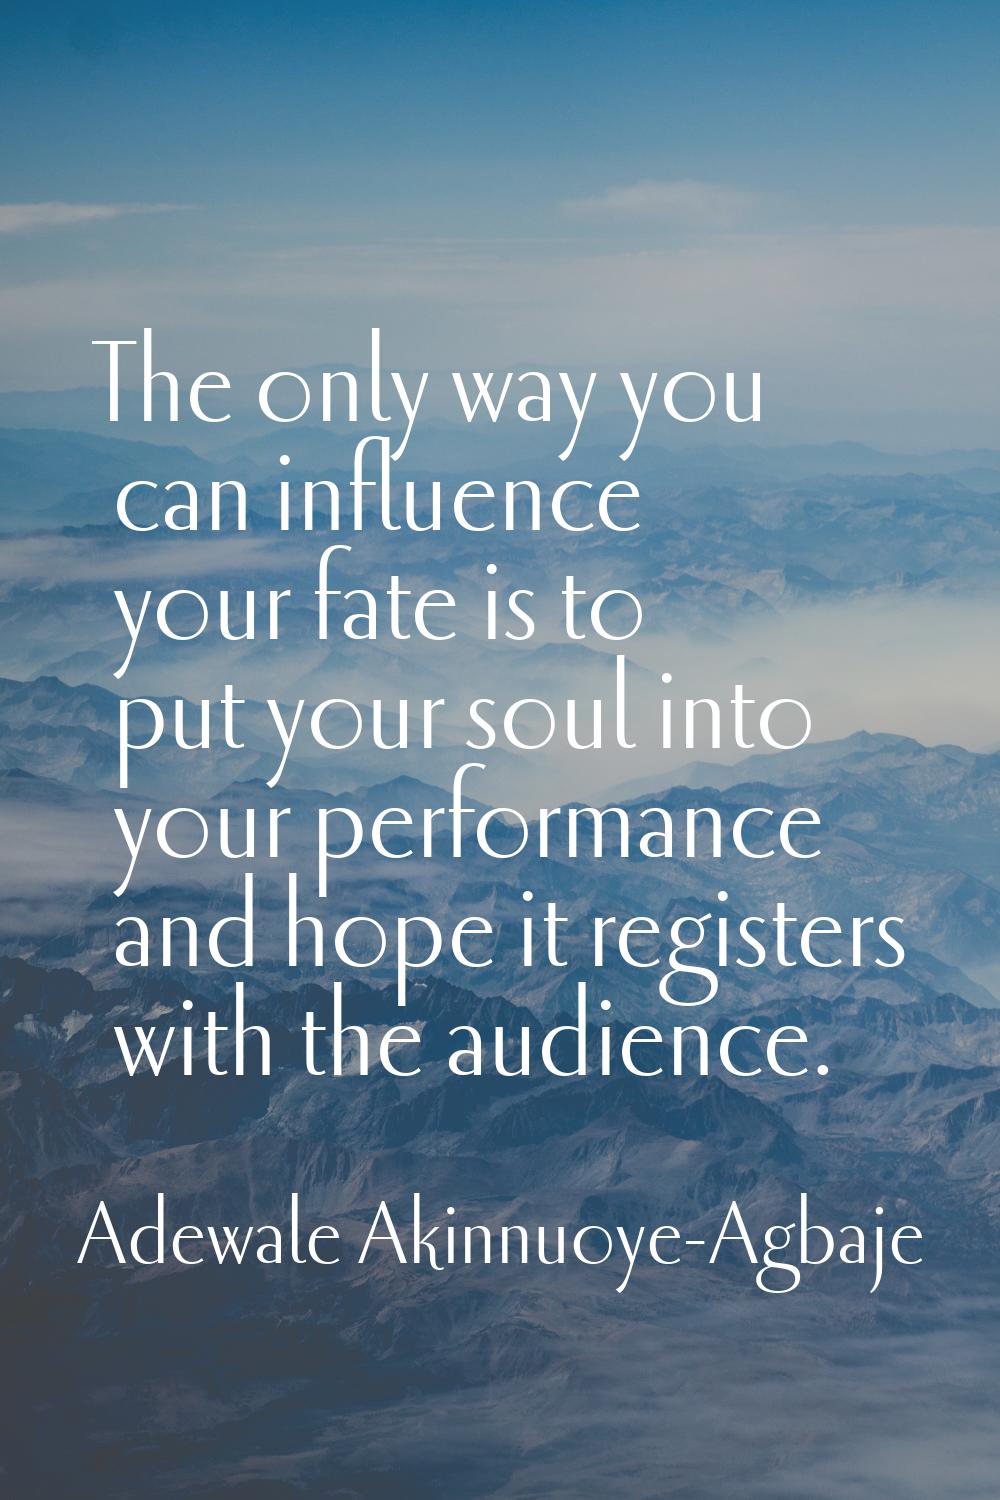 The only way you can influence your fate is to put your soul into your performance and hope it regi